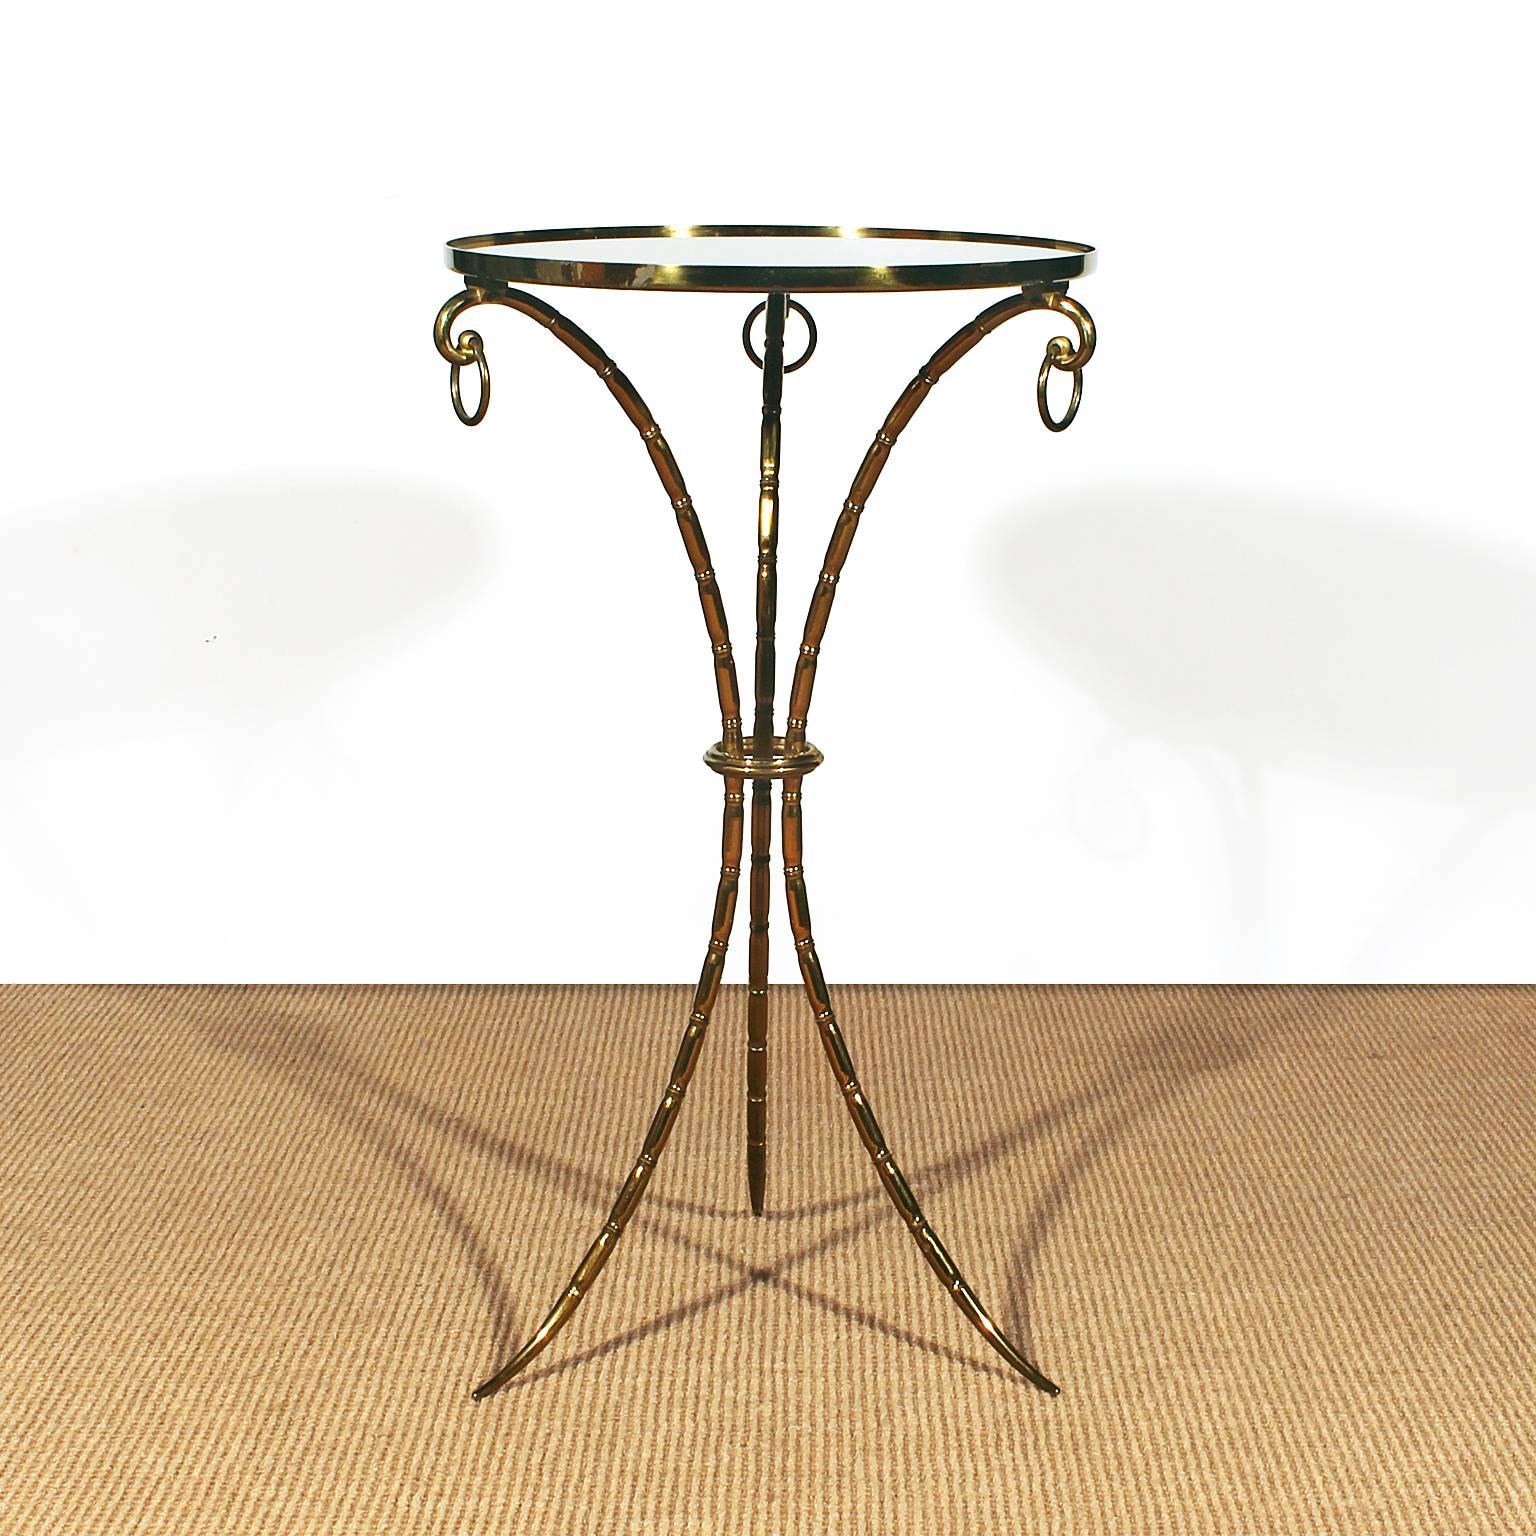 Small side table, false bamboo bronze structure, eglomised mirror on top.
Maison Baguès,
France, circa 1940.